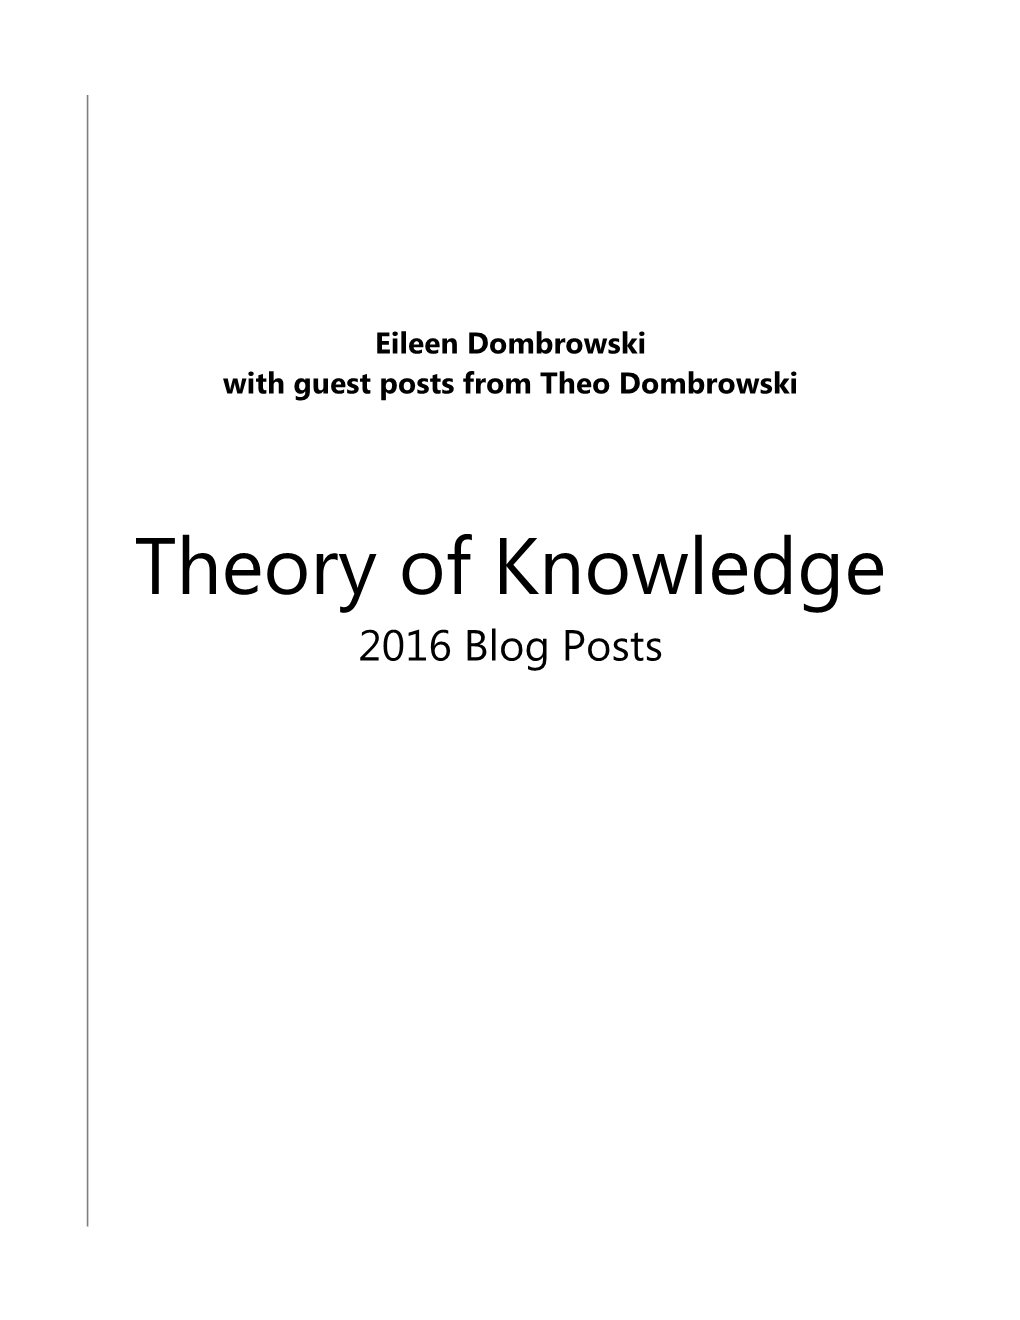 Eileen Dombrowski. Theory of Knowledge Blog, Oxford Education Blog, 2016